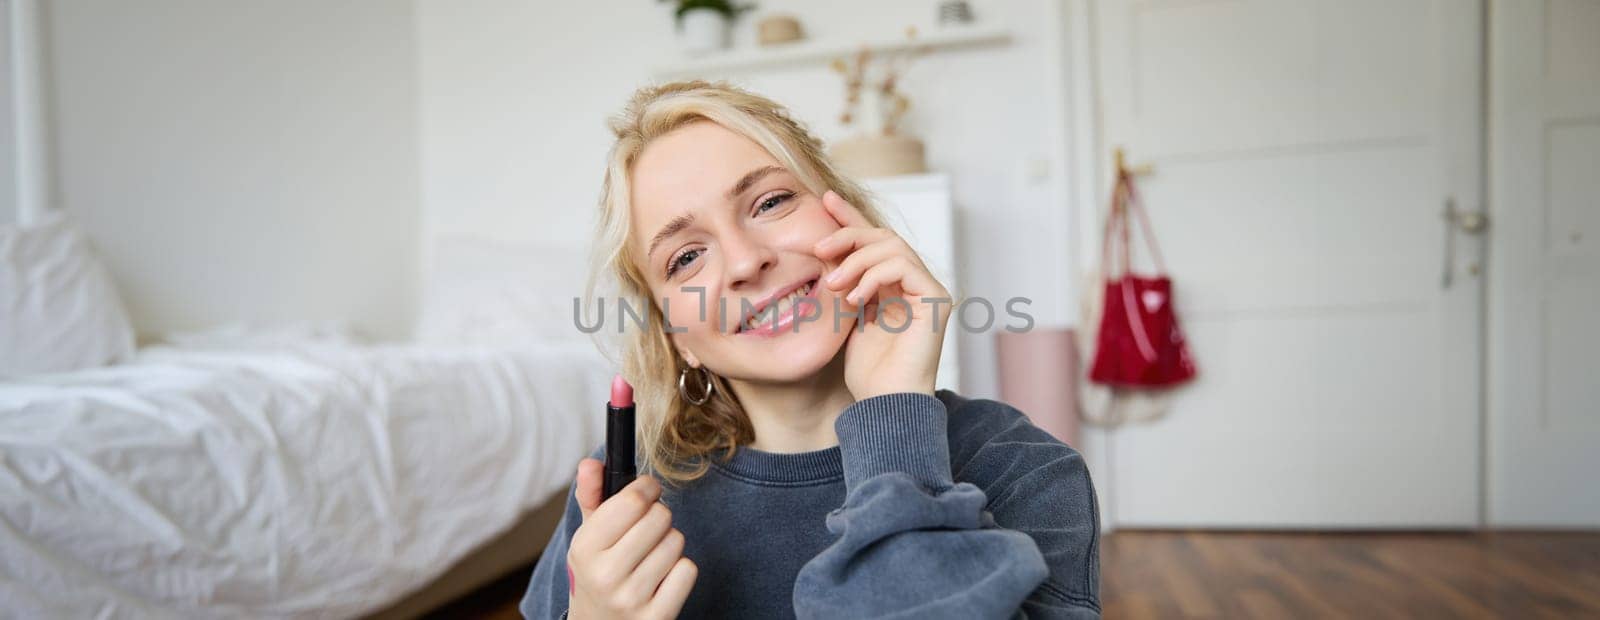 Portrait of young beautiful woman recording video blog in her room, lifestyle beauty content for social media, talking in front of camera, live stream chatting online with followers.